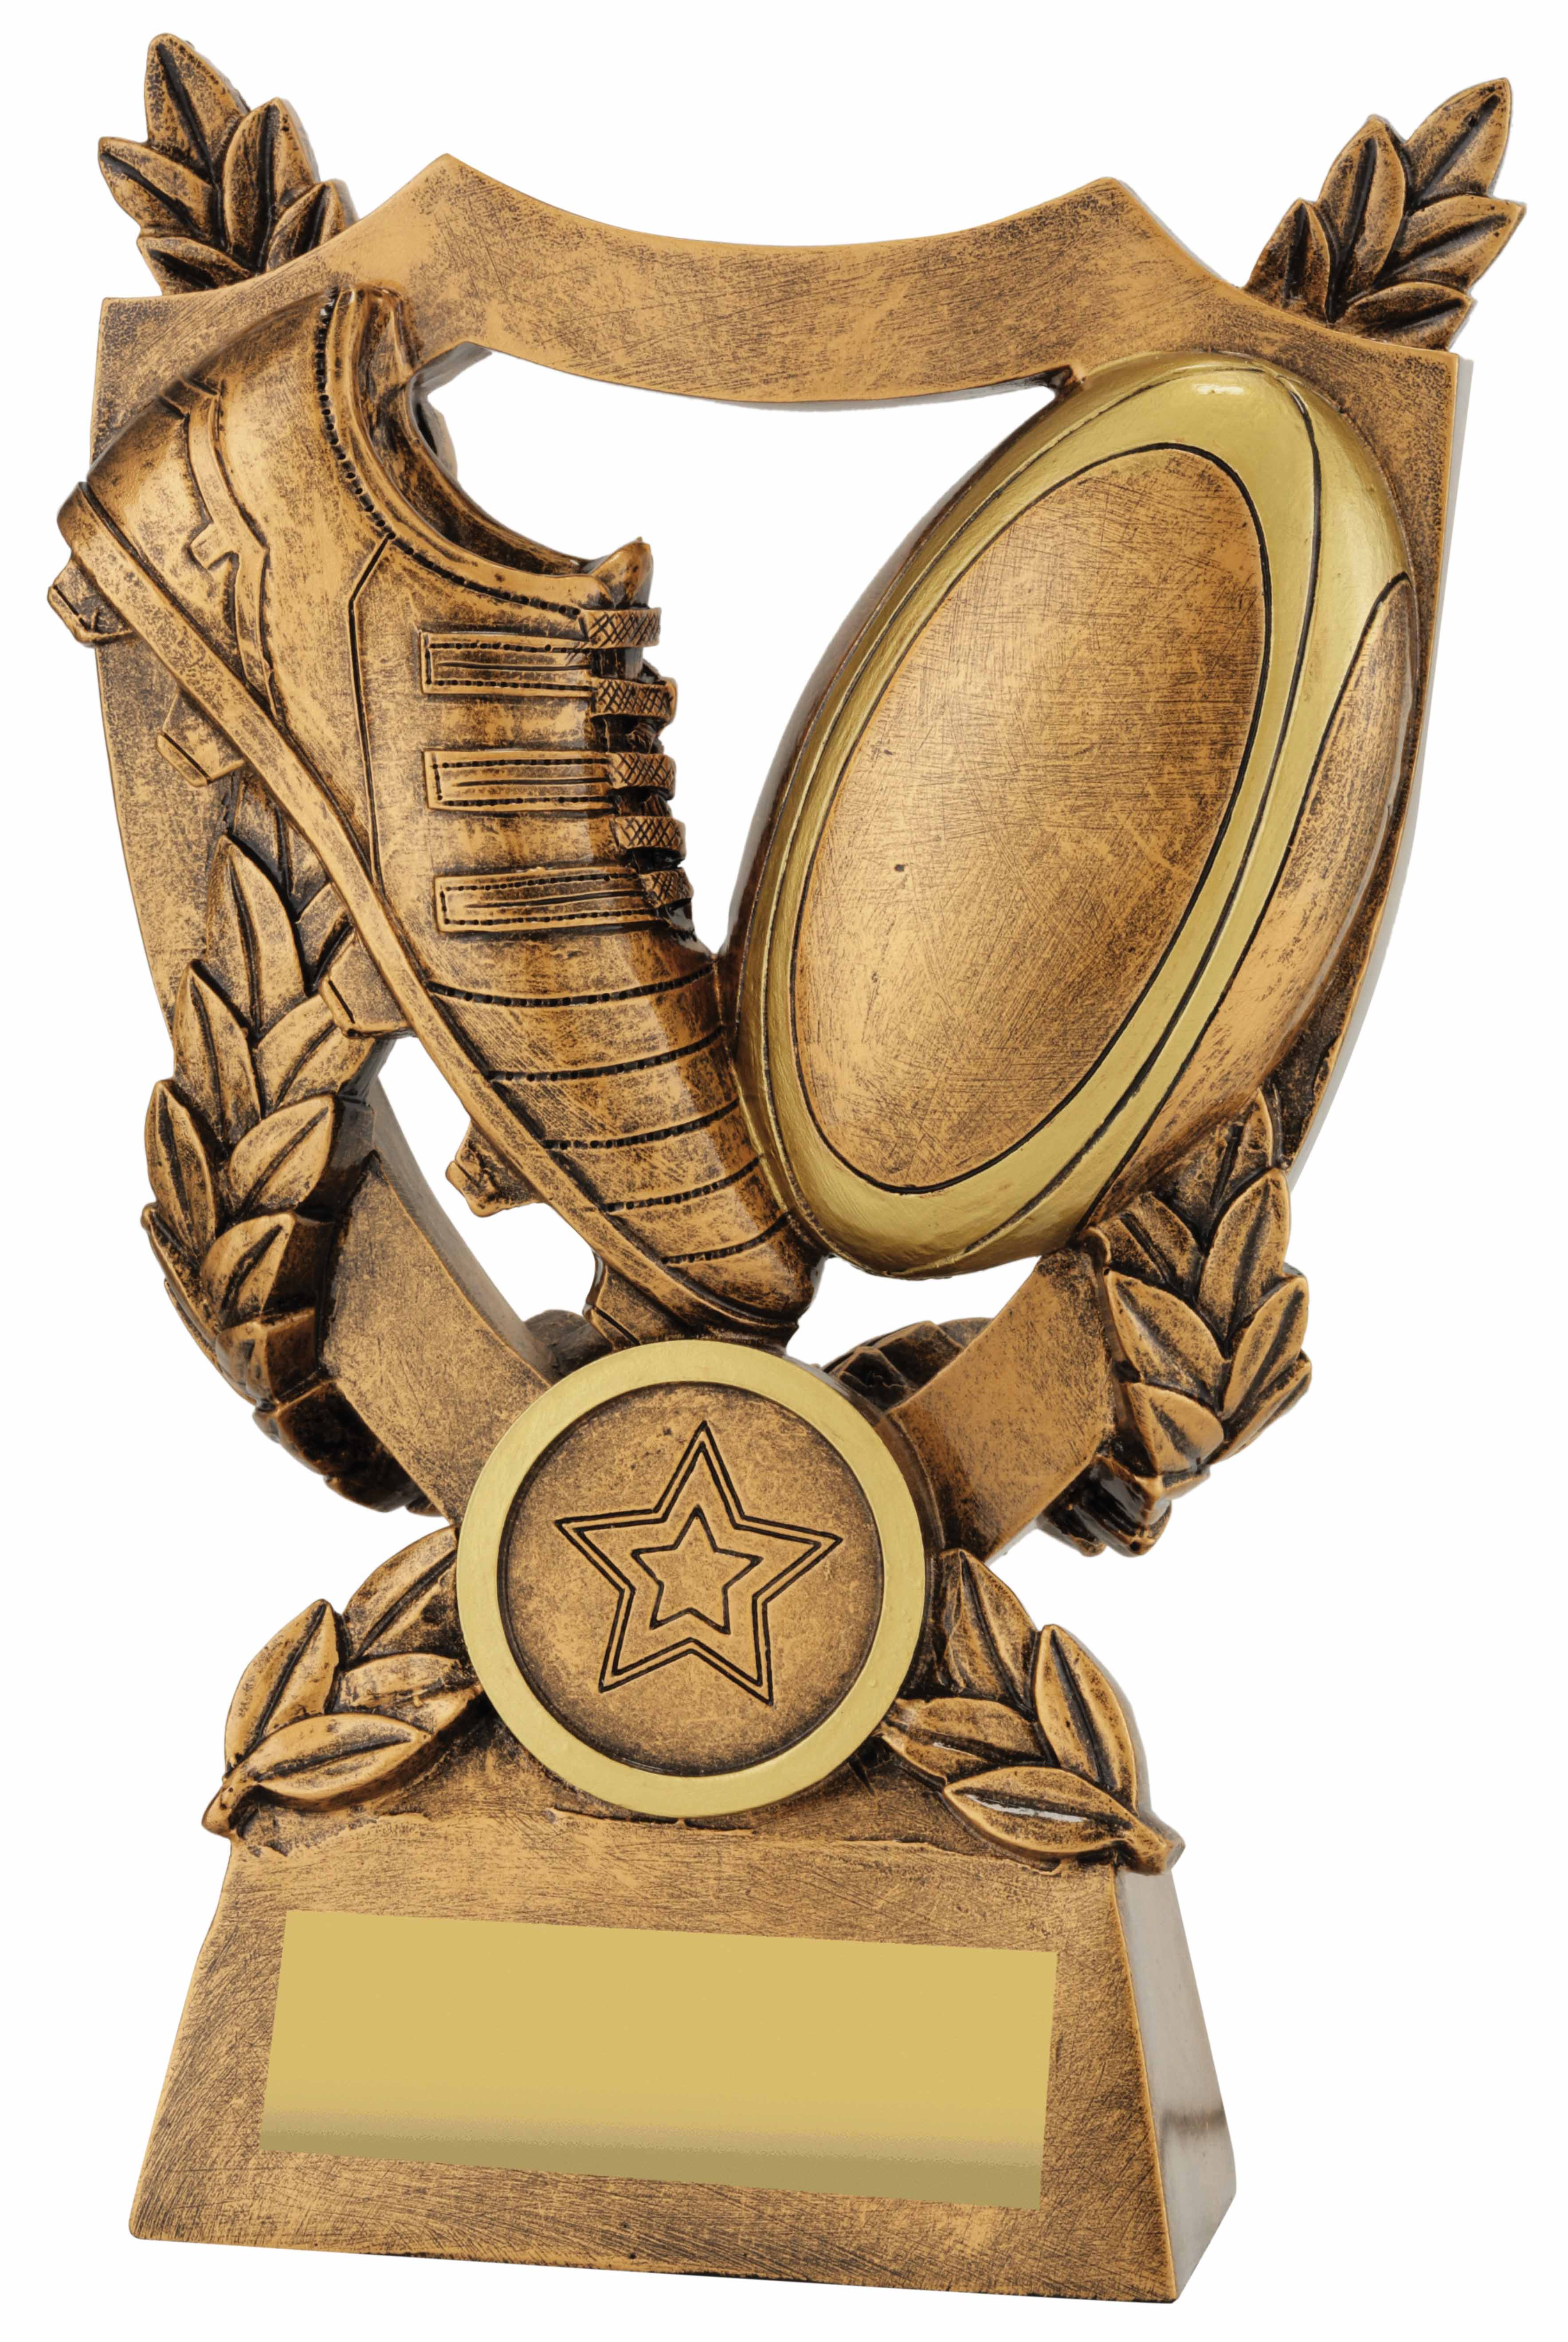 Rugby Trophies Resin Rugby Ball Player Scene Trophy Award 3 sizes FREE Engraving 